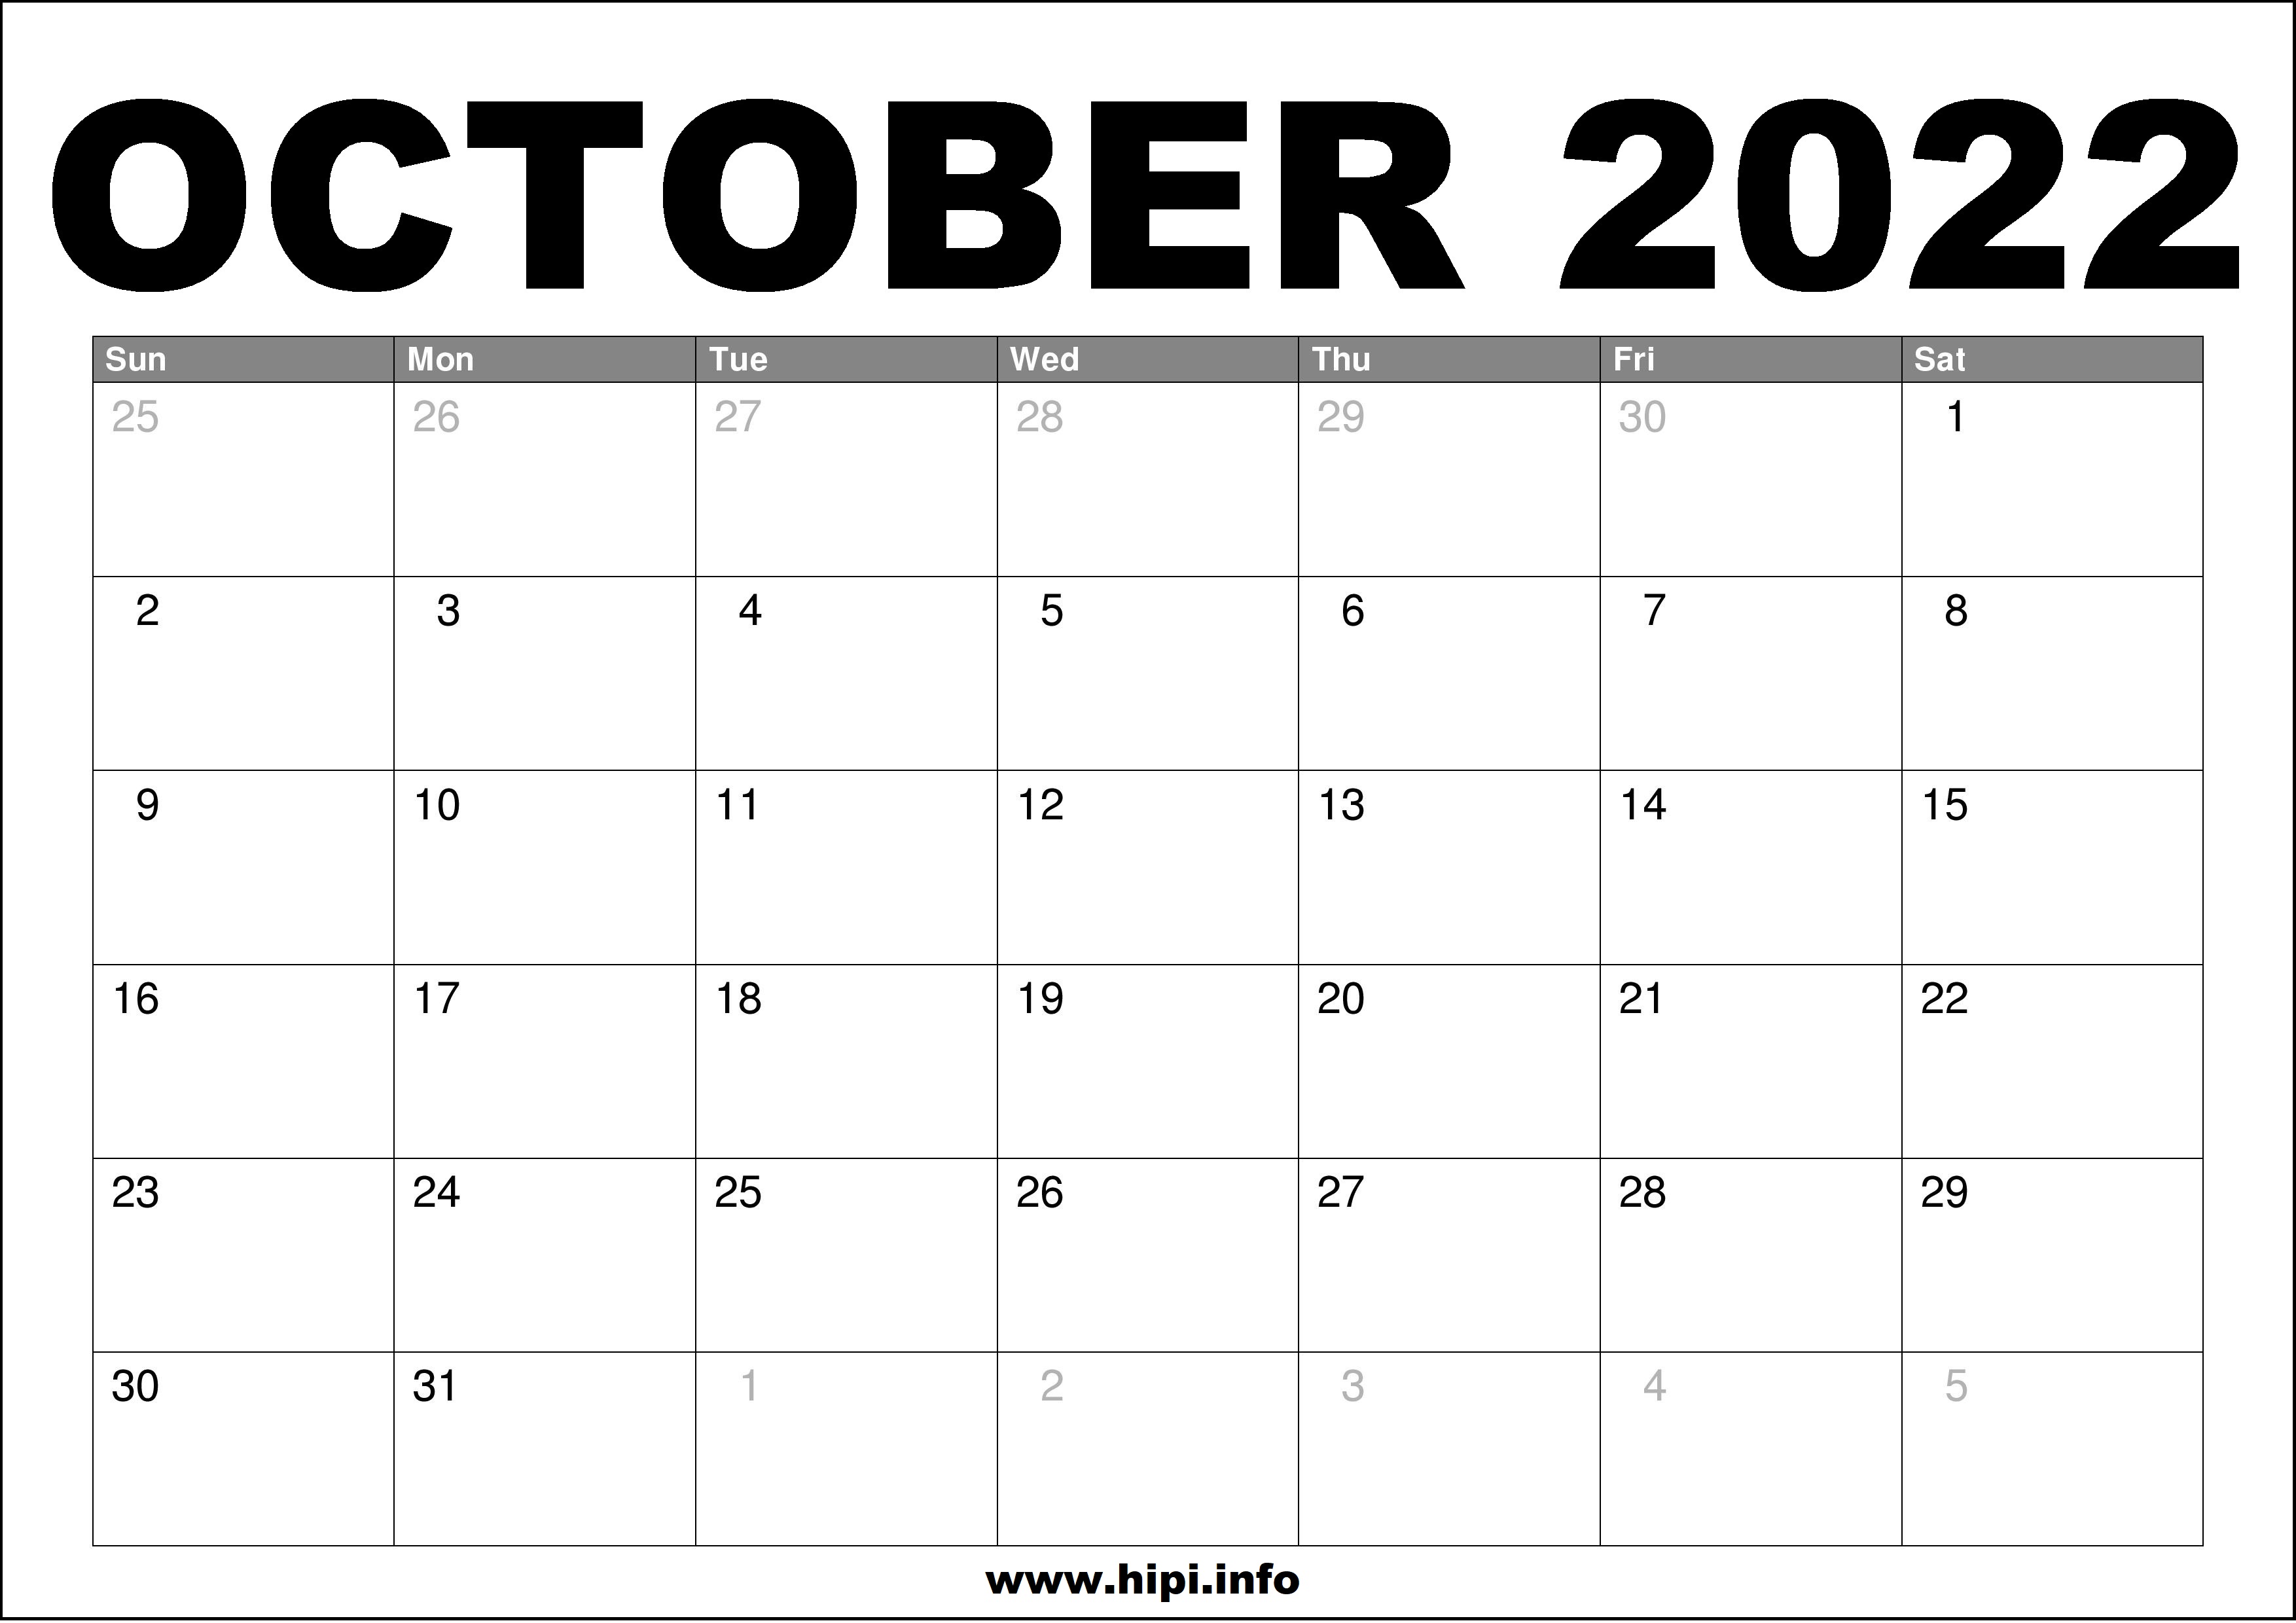 Free Printable Monthly Calendar October 2022 October 2022 Calendar Printable Free - Hipi.info | Calendars Printable Free